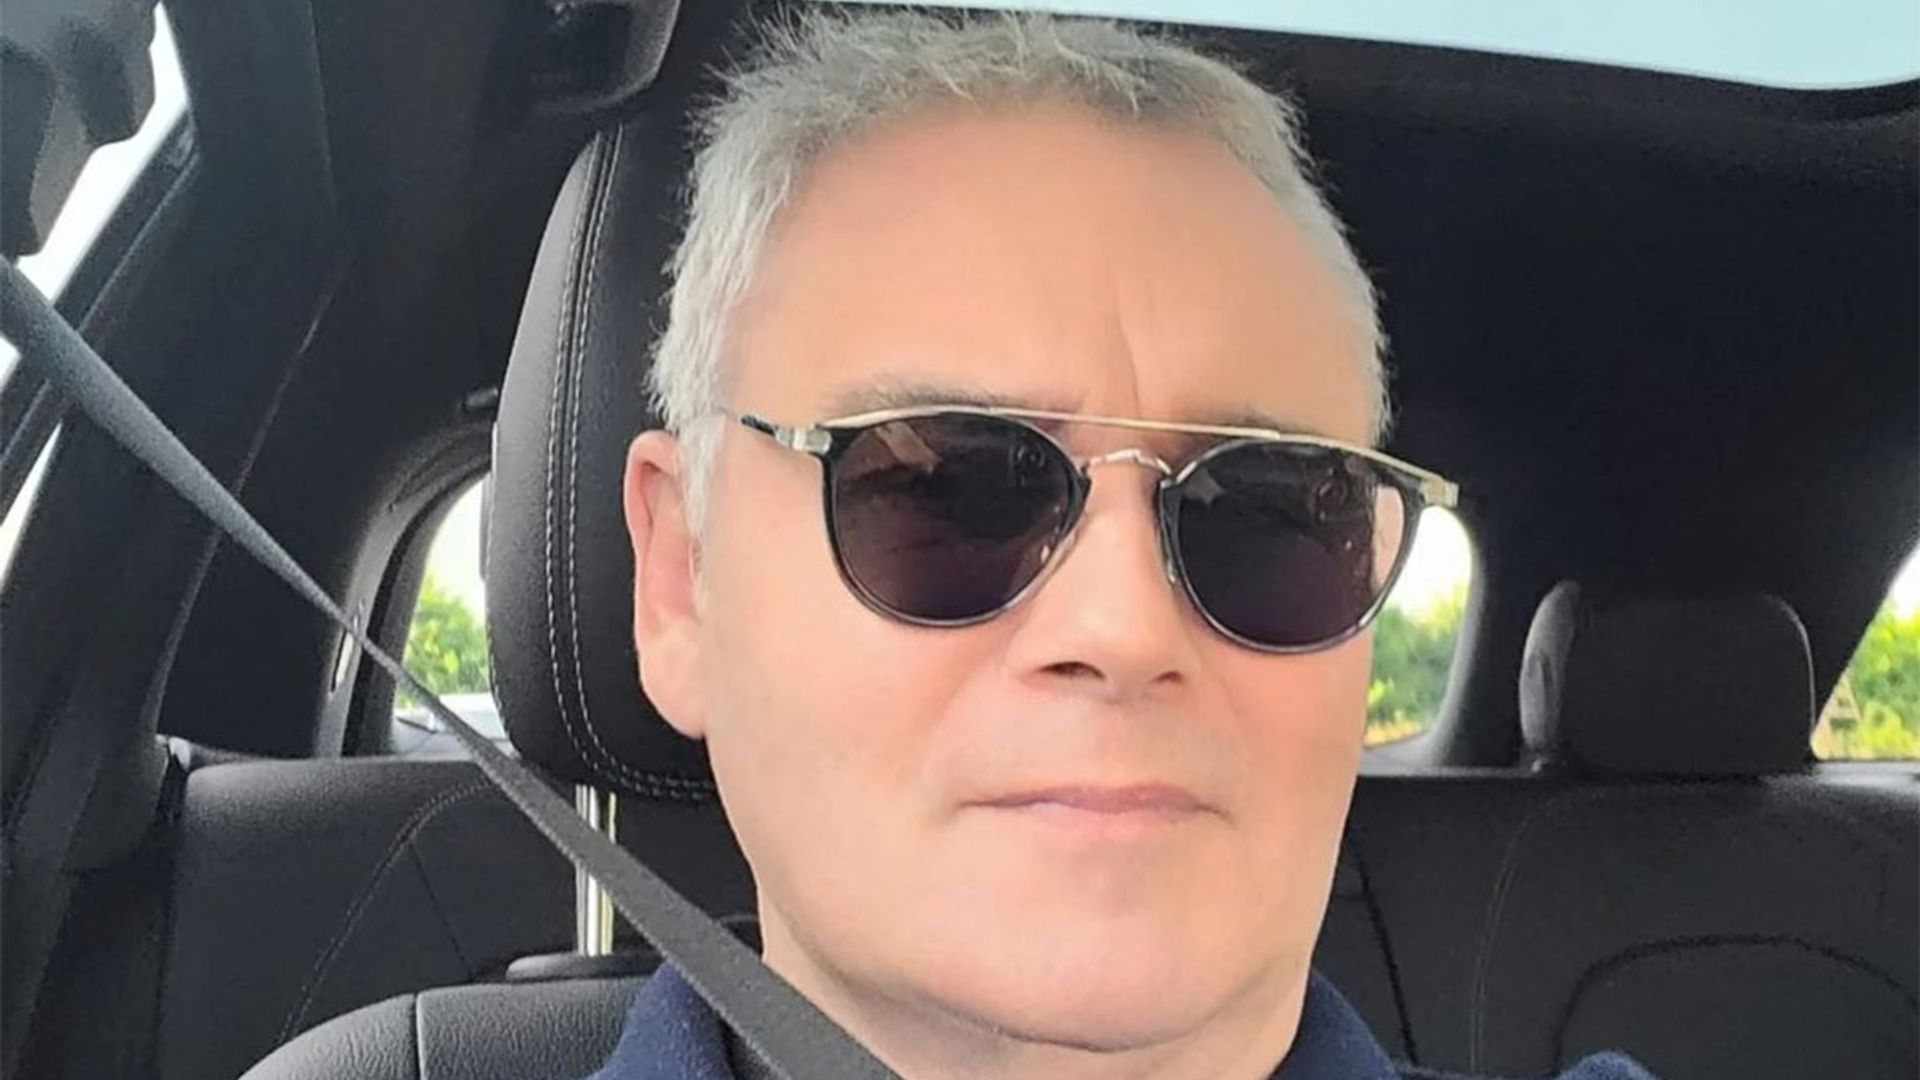 Eamonn Holmes shocks fans as he turns to alternative medicine to cure back problems